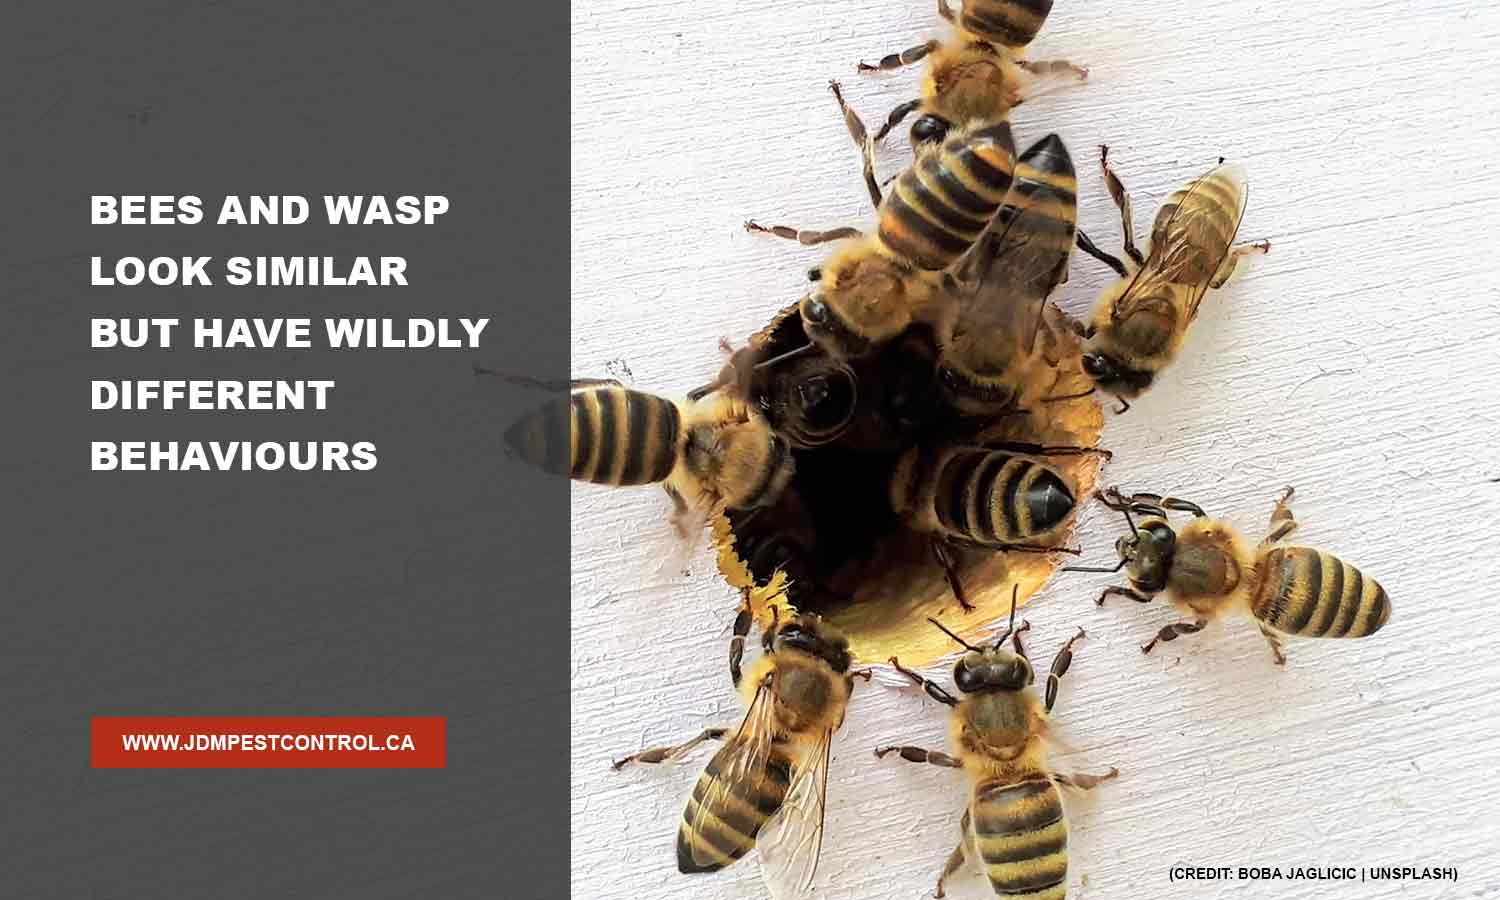 Bees and wasp look similar but have wildly different behaviours